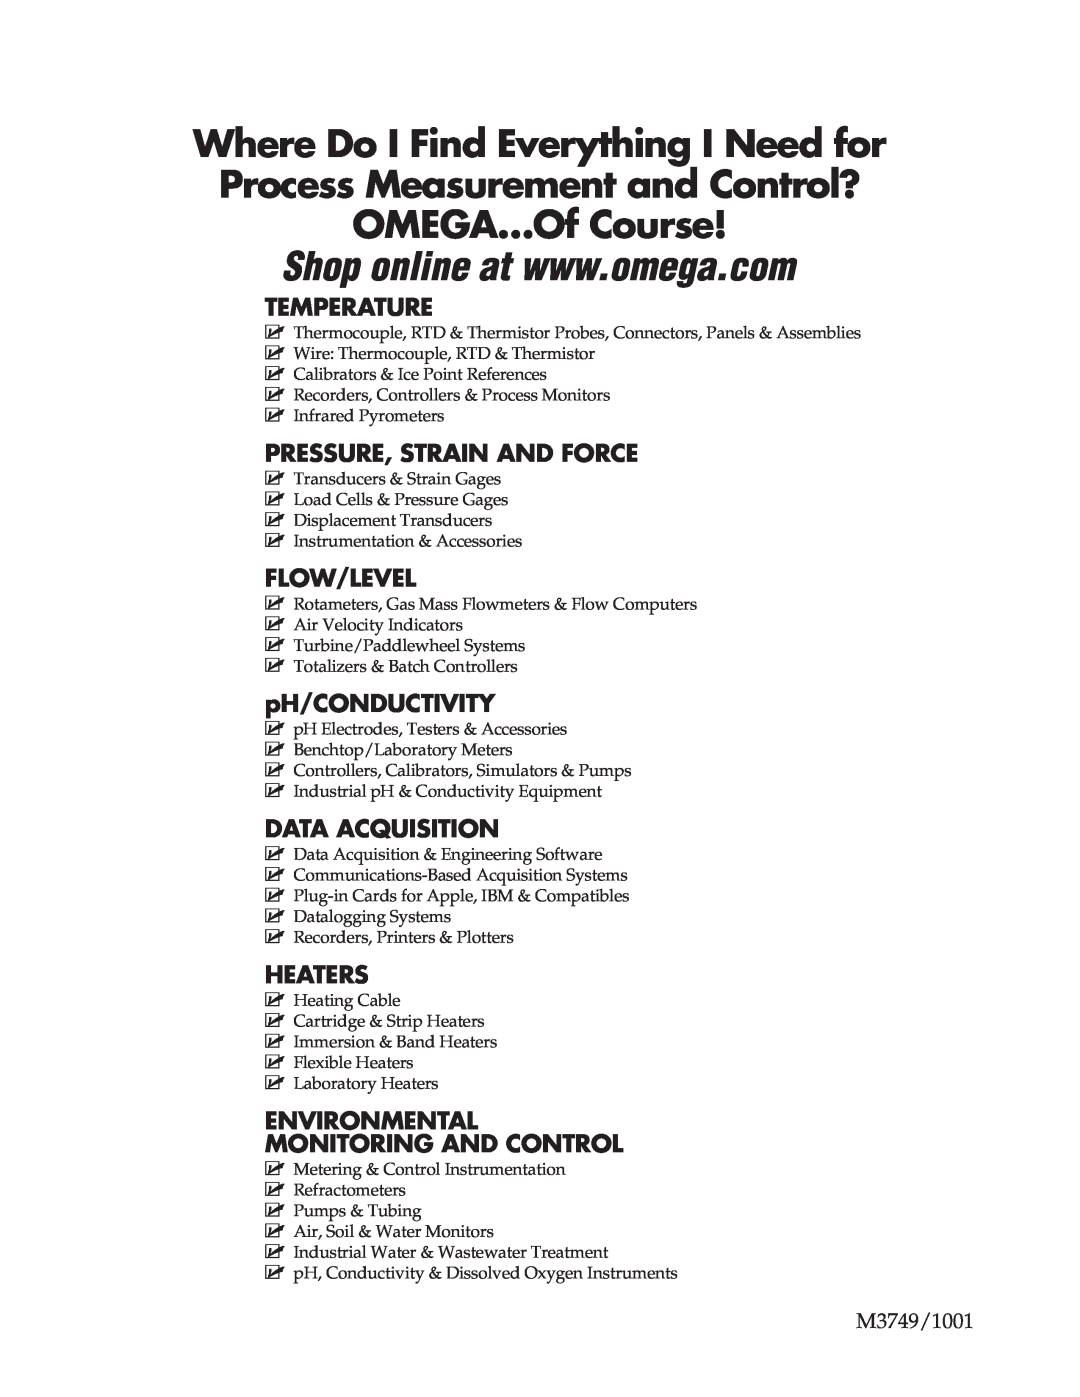 Omega WMS-16 manual OMEGA…Of Course, Temperature, Pressure, Strain And Force, Flow/Level, pH/CONDUCTIVITY, Data Acquisition 